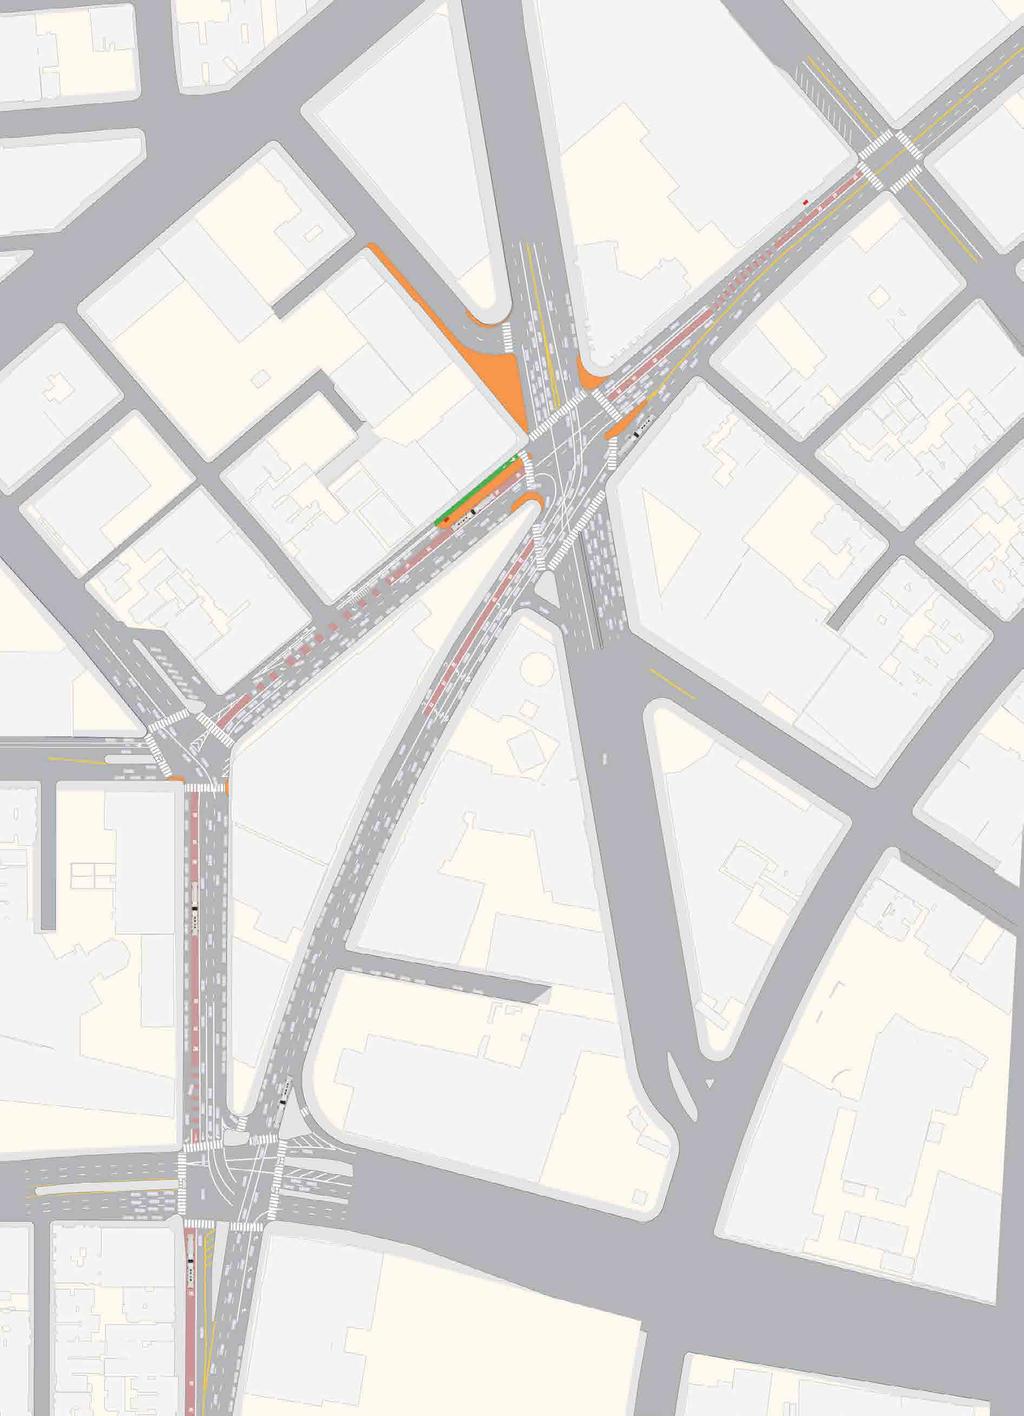 Proposal Detail: 11th to 13th New Pedestrian Islands New Transit Island Relocate Stop New Pedestrian Bulbs New Right Turn Pocket New Bike Lane Remove Left Turn Lane 11th St to 13th St at Mission and